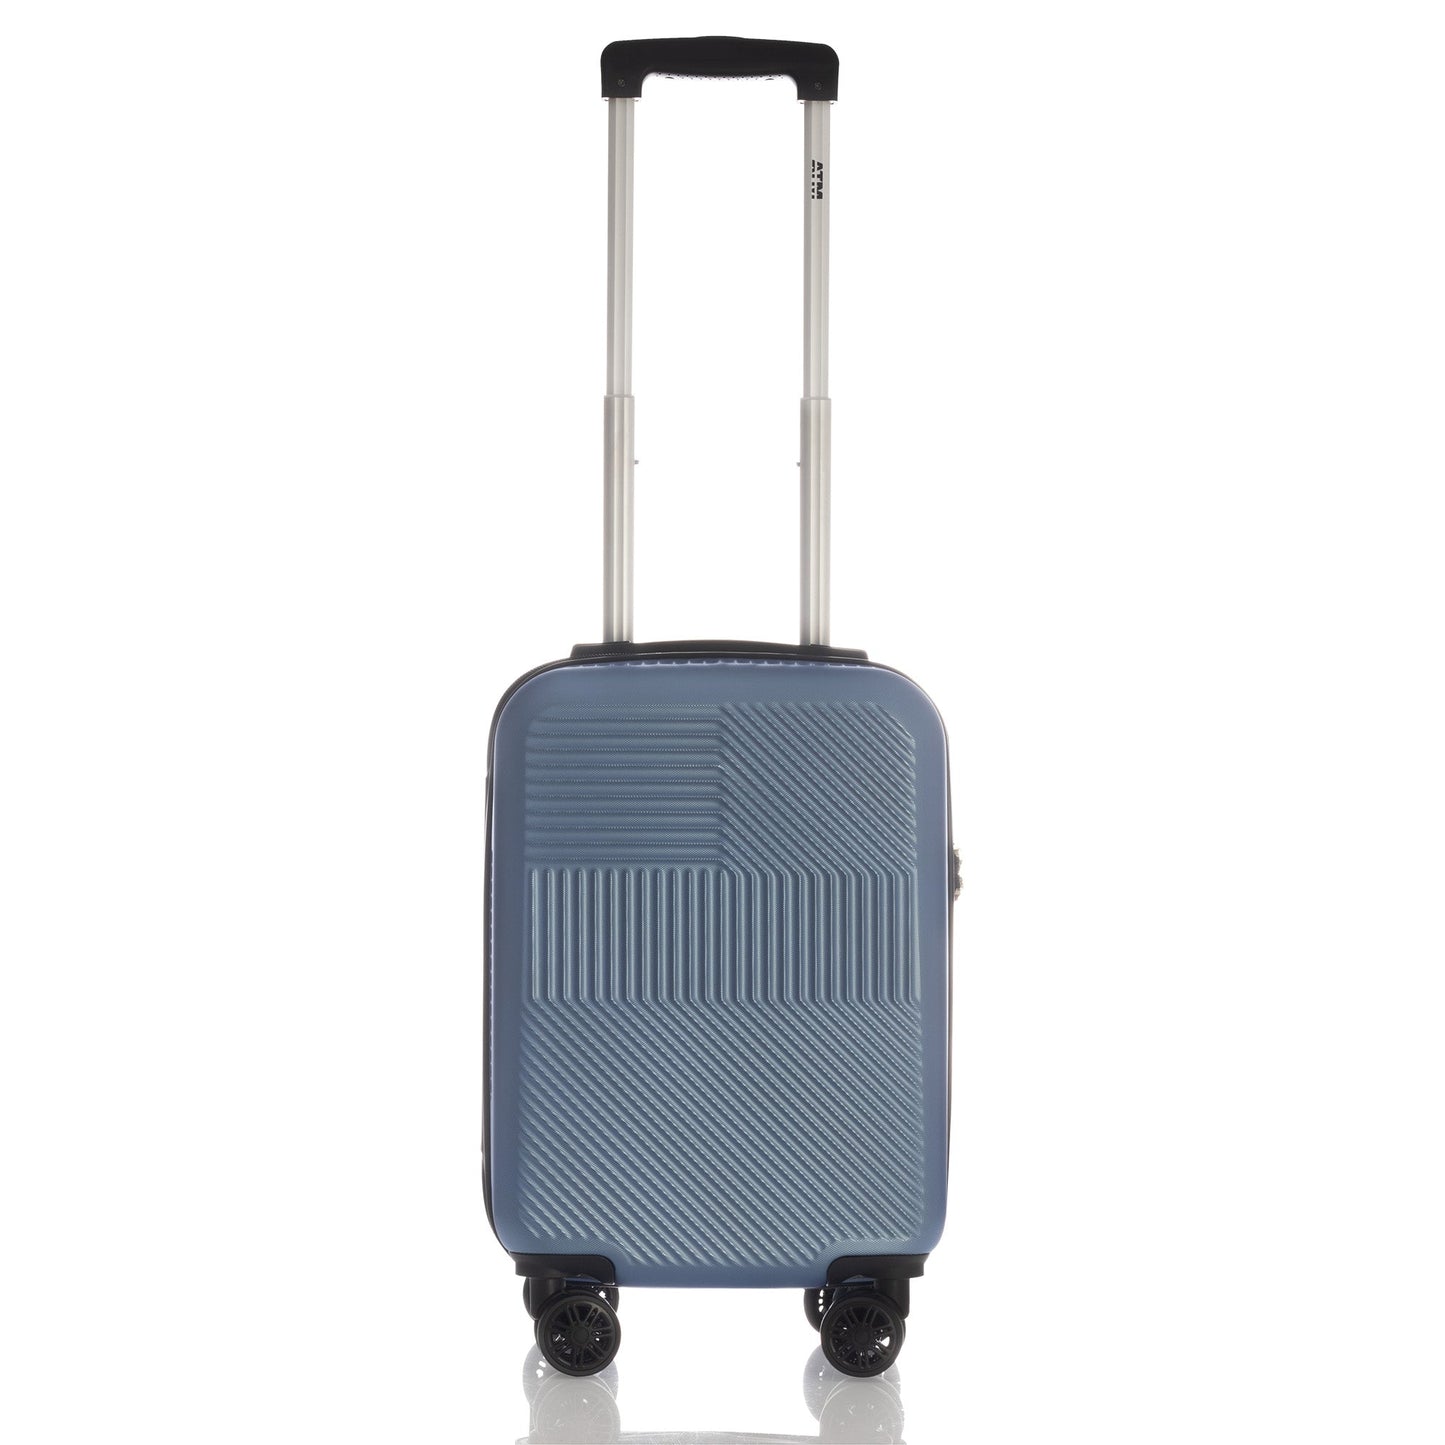 Vita collection luggage blue (18/22/26/30") Suitcase Lock Spinne